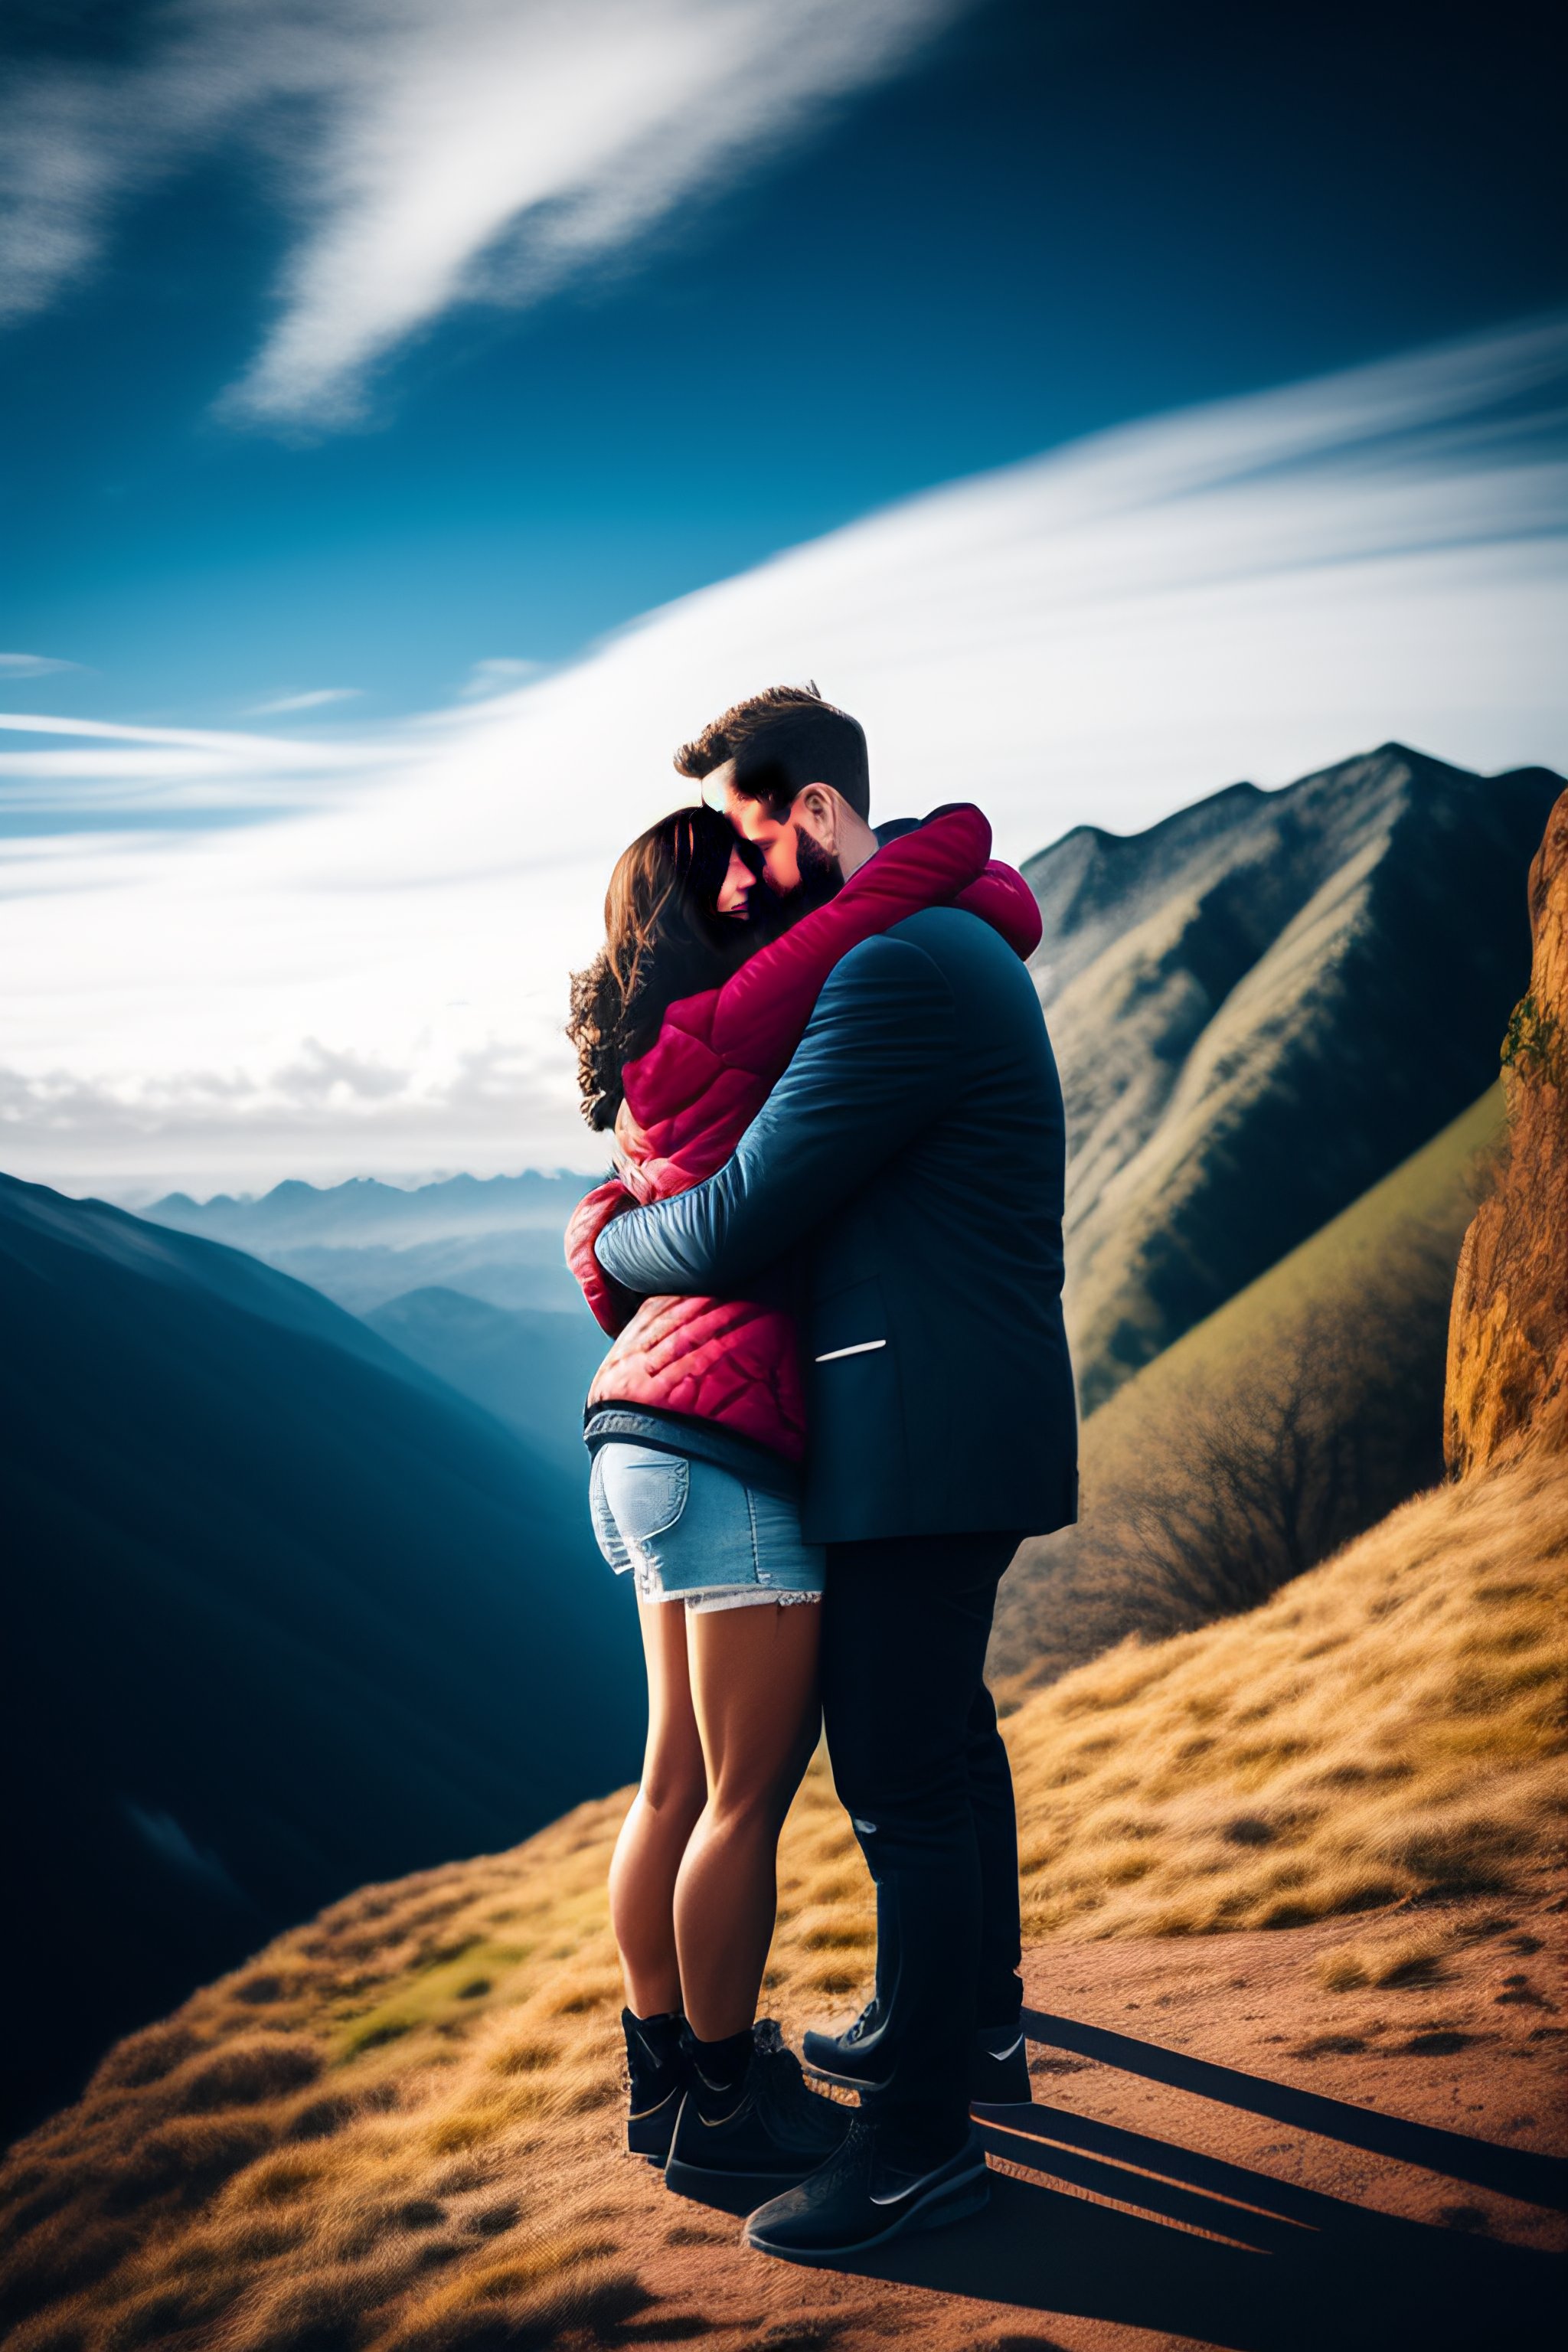 Lexica - A short girl and tall boy hugging on top of mountains